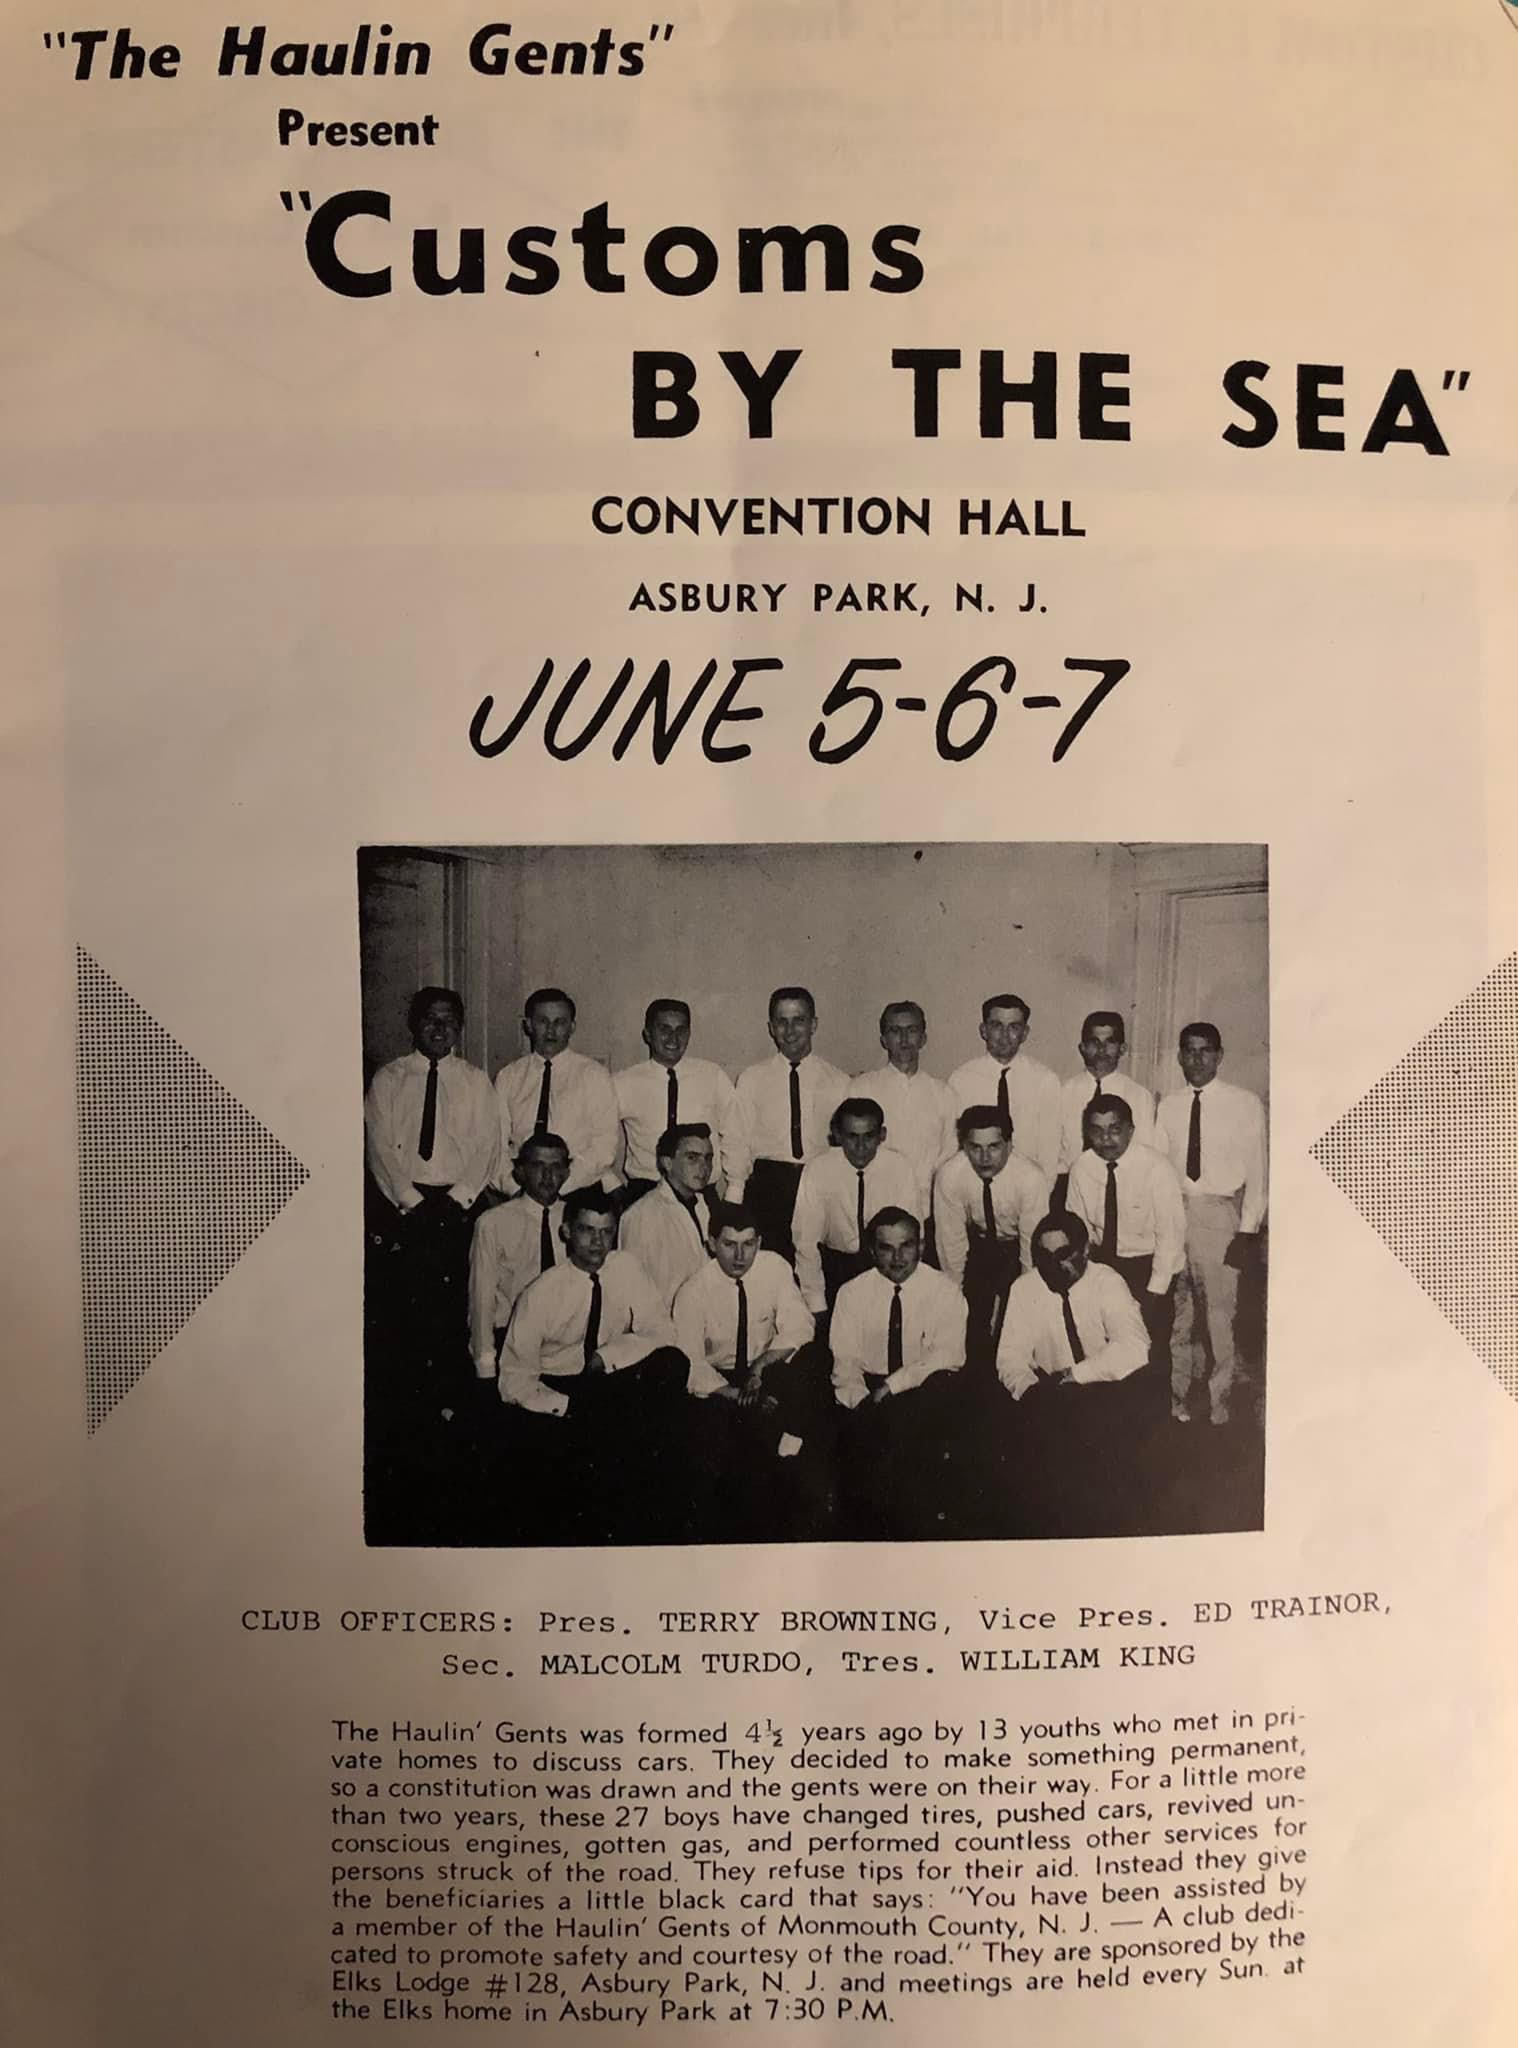 Customs By The Sea Returns to Convention Hall